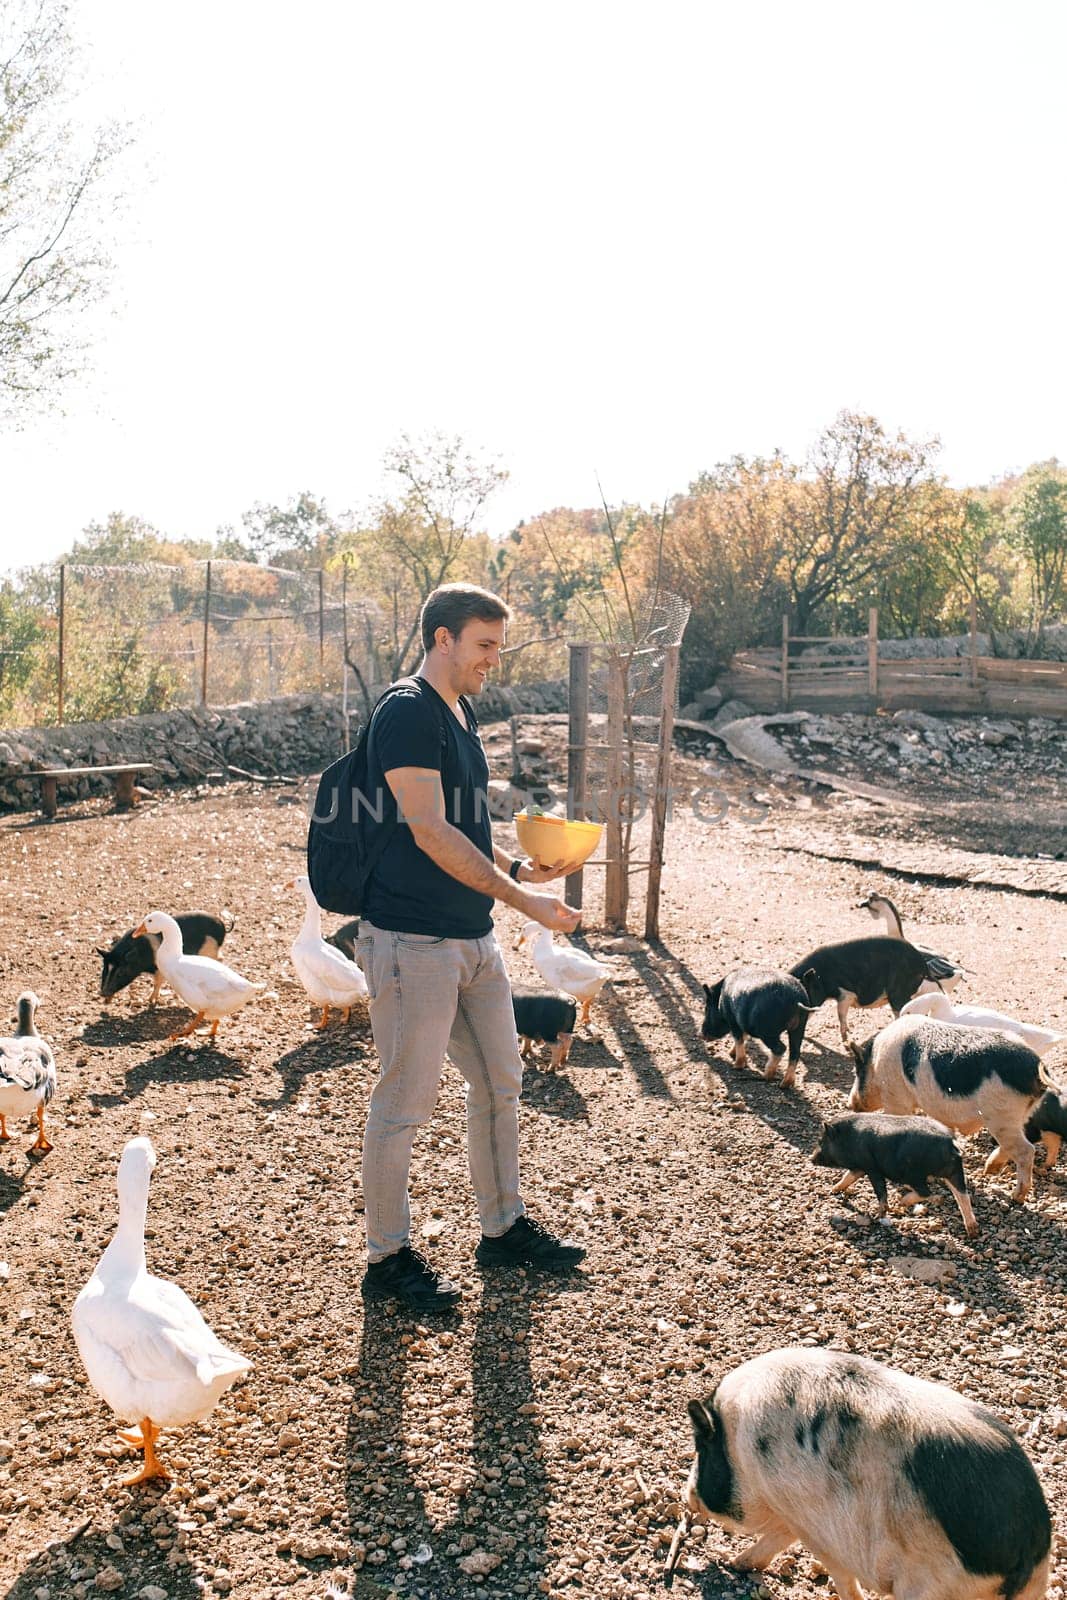 Young smiling guy with a bowl in his hands feeds fluffy piglets and white geese by Nadtochiy